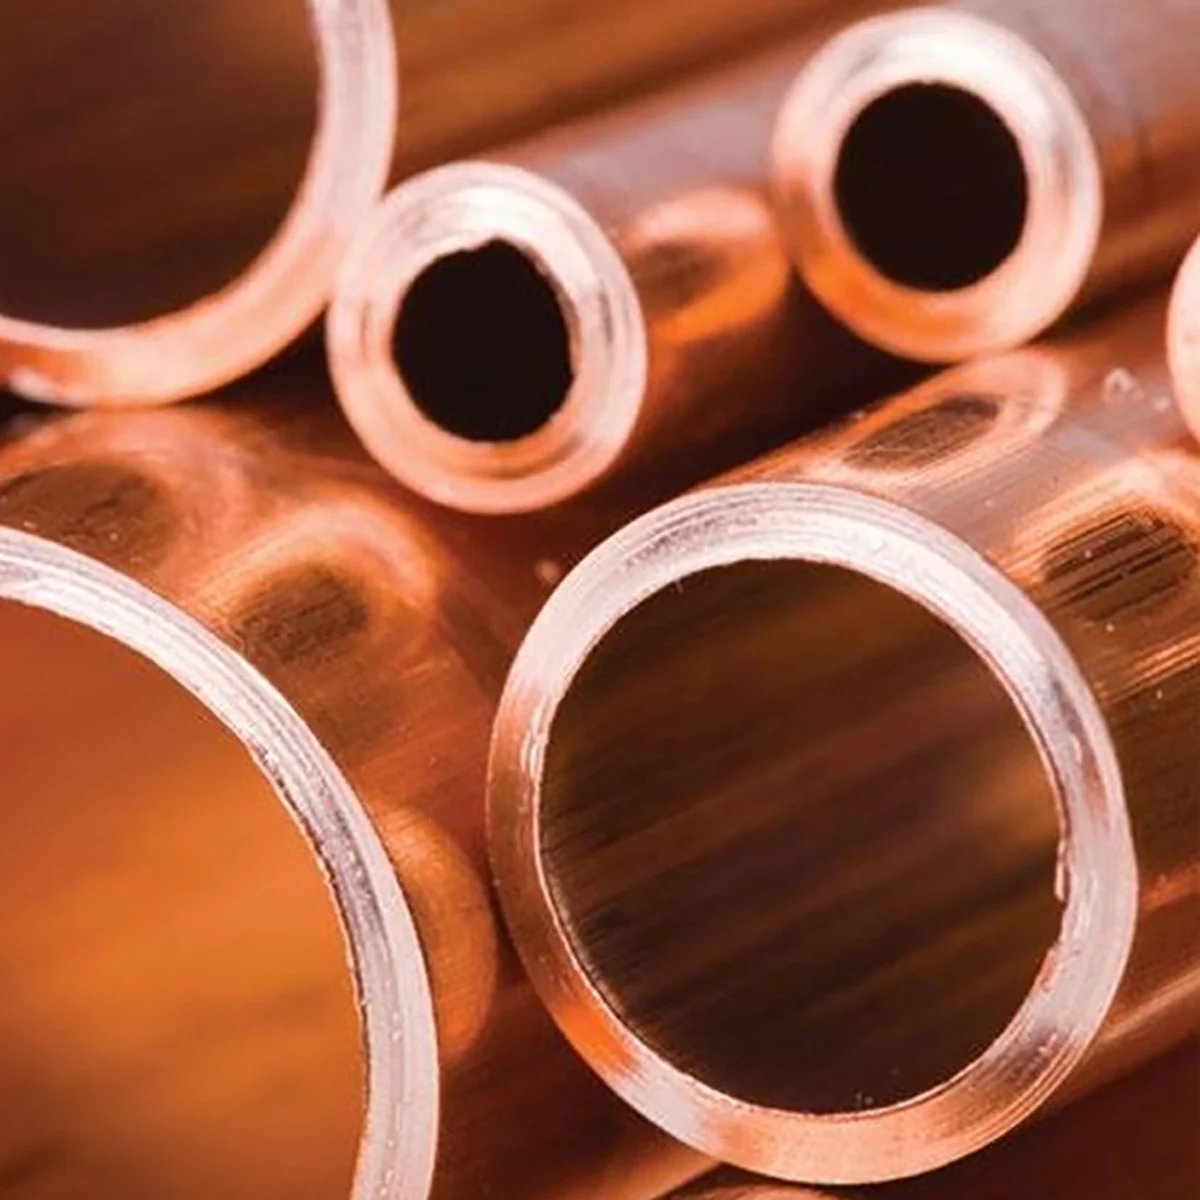 1pcs T2 Copper Pipe Tube Copper Pipe,for Building Model Capillary Hollow  Copper Pipe Factory Outlets OD10~54mm Long Tubes (Color : 50cm, Size : OD  10